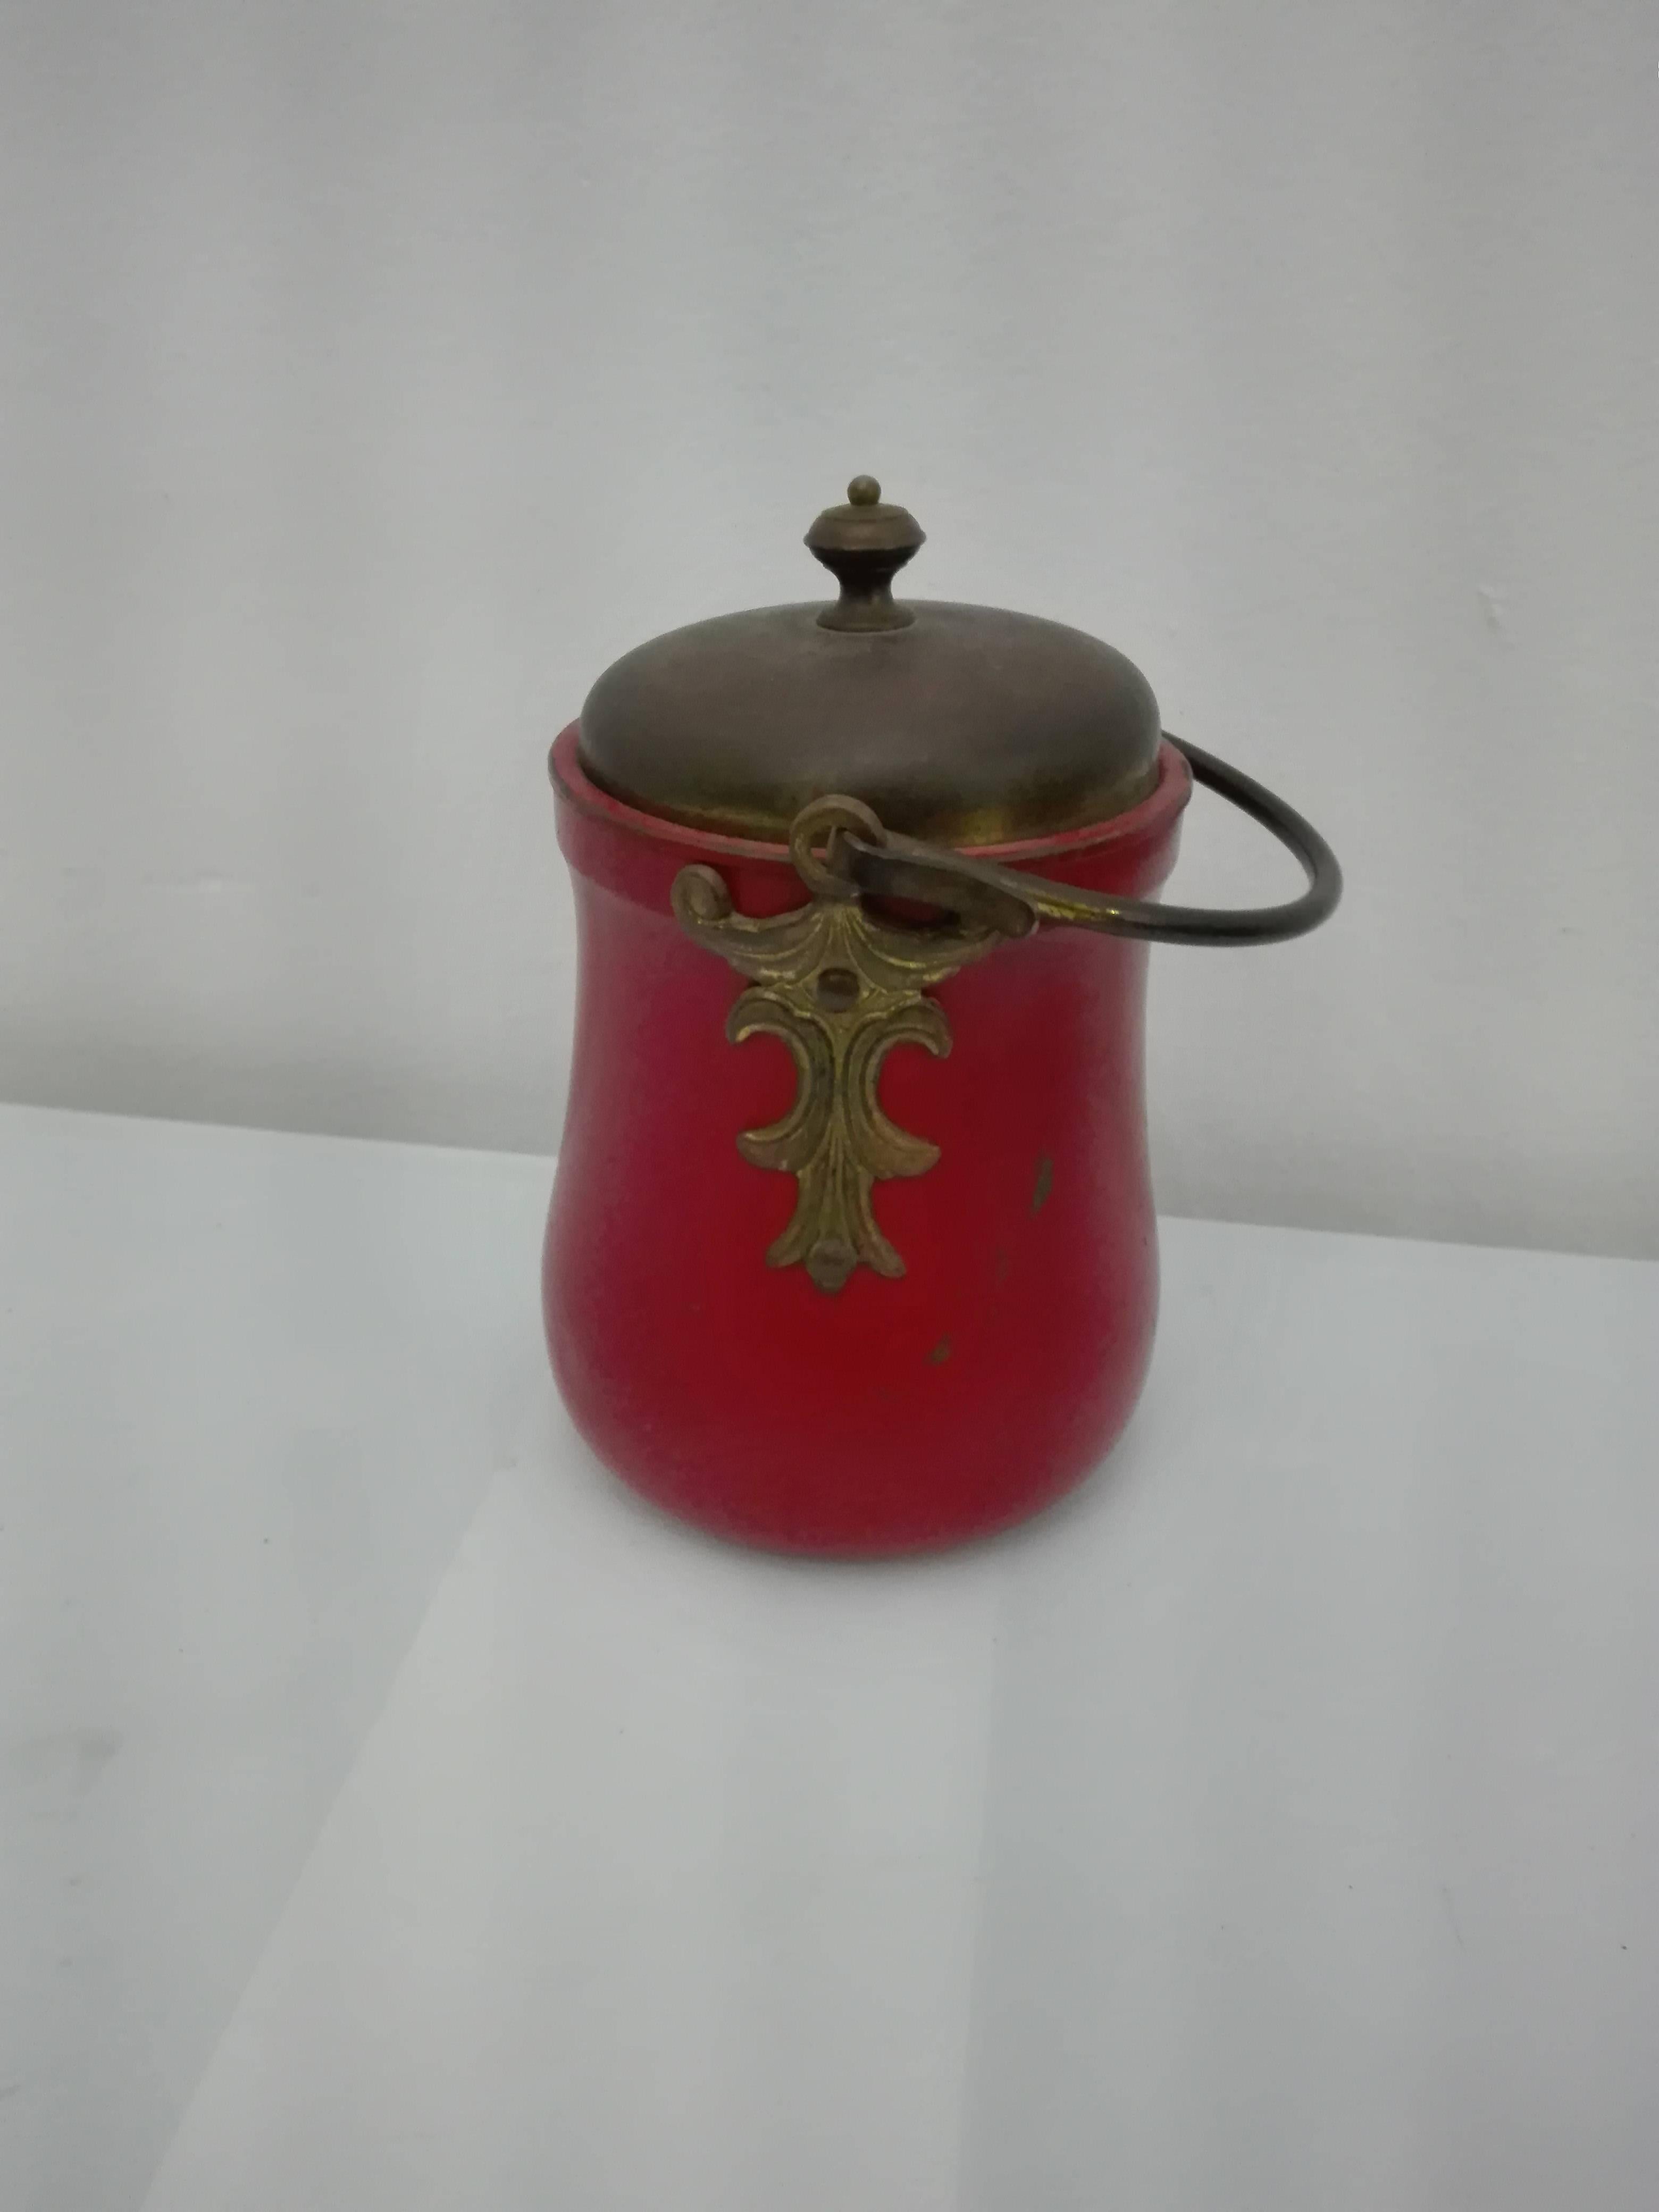 Spectacular ice bucket from the 1960s, Aldo Tura design. Made of brass, the main color red, is an object increasingly sought after by collectors, also present in major design auctions.